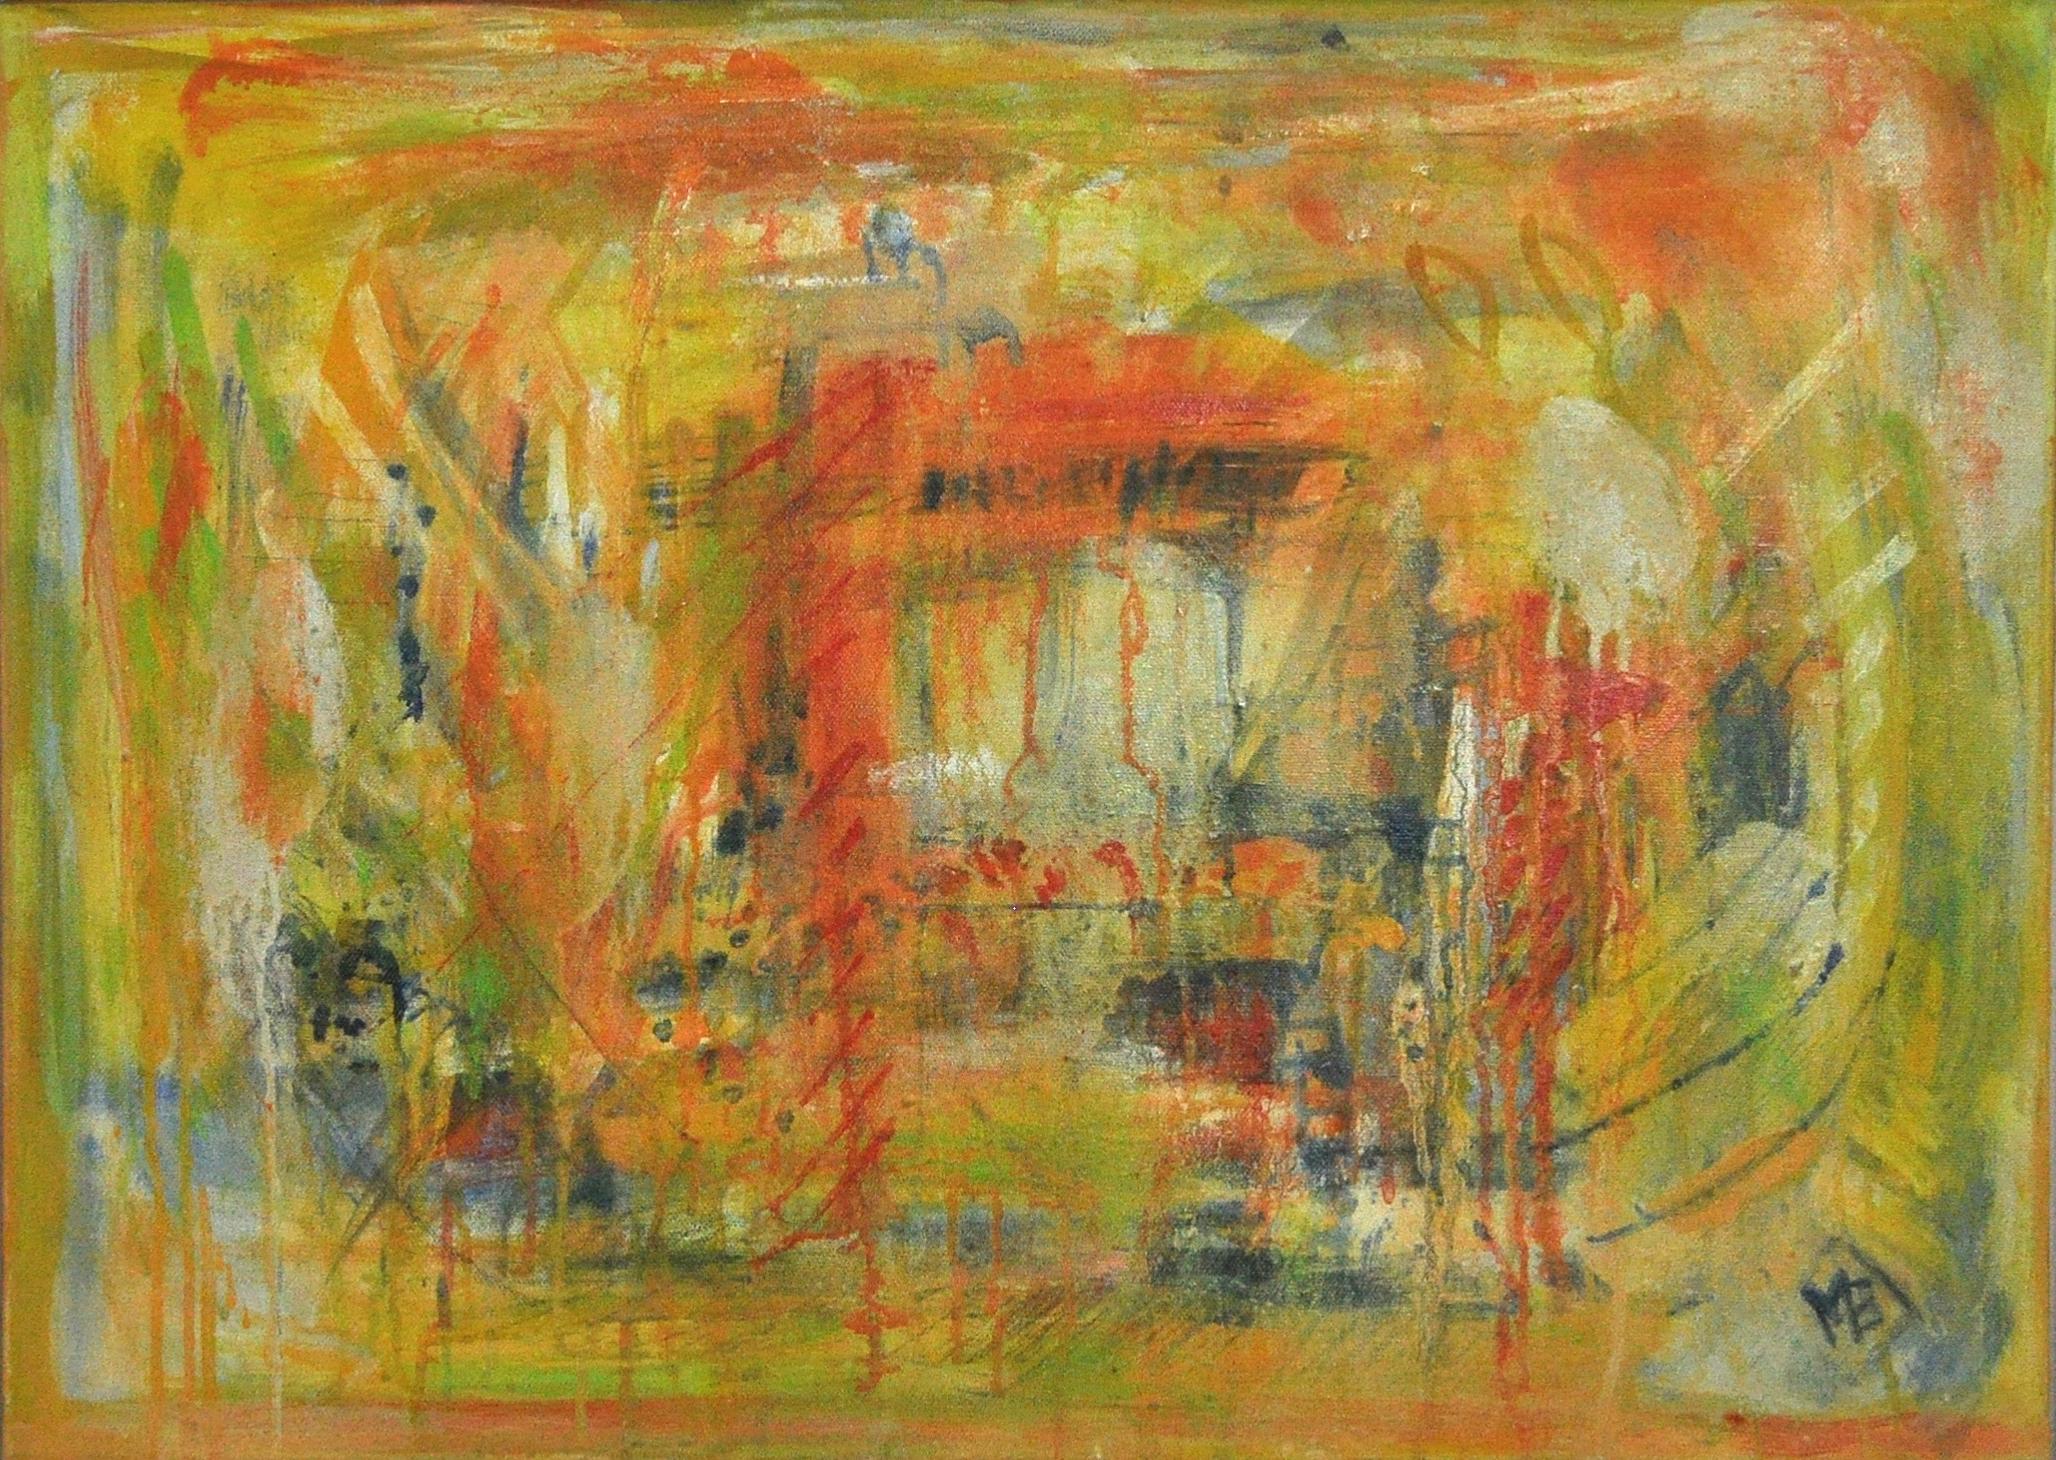 Contemporary danish painting, oil on canvas.
Title: "A City - I"
H: 50cm, W: 70cm. Signed, 2005.

The series "A City" I-IV was inspired by a study trip to Rome.
Nature is often the starting point for the painter and weaver Mette Birckner, but going